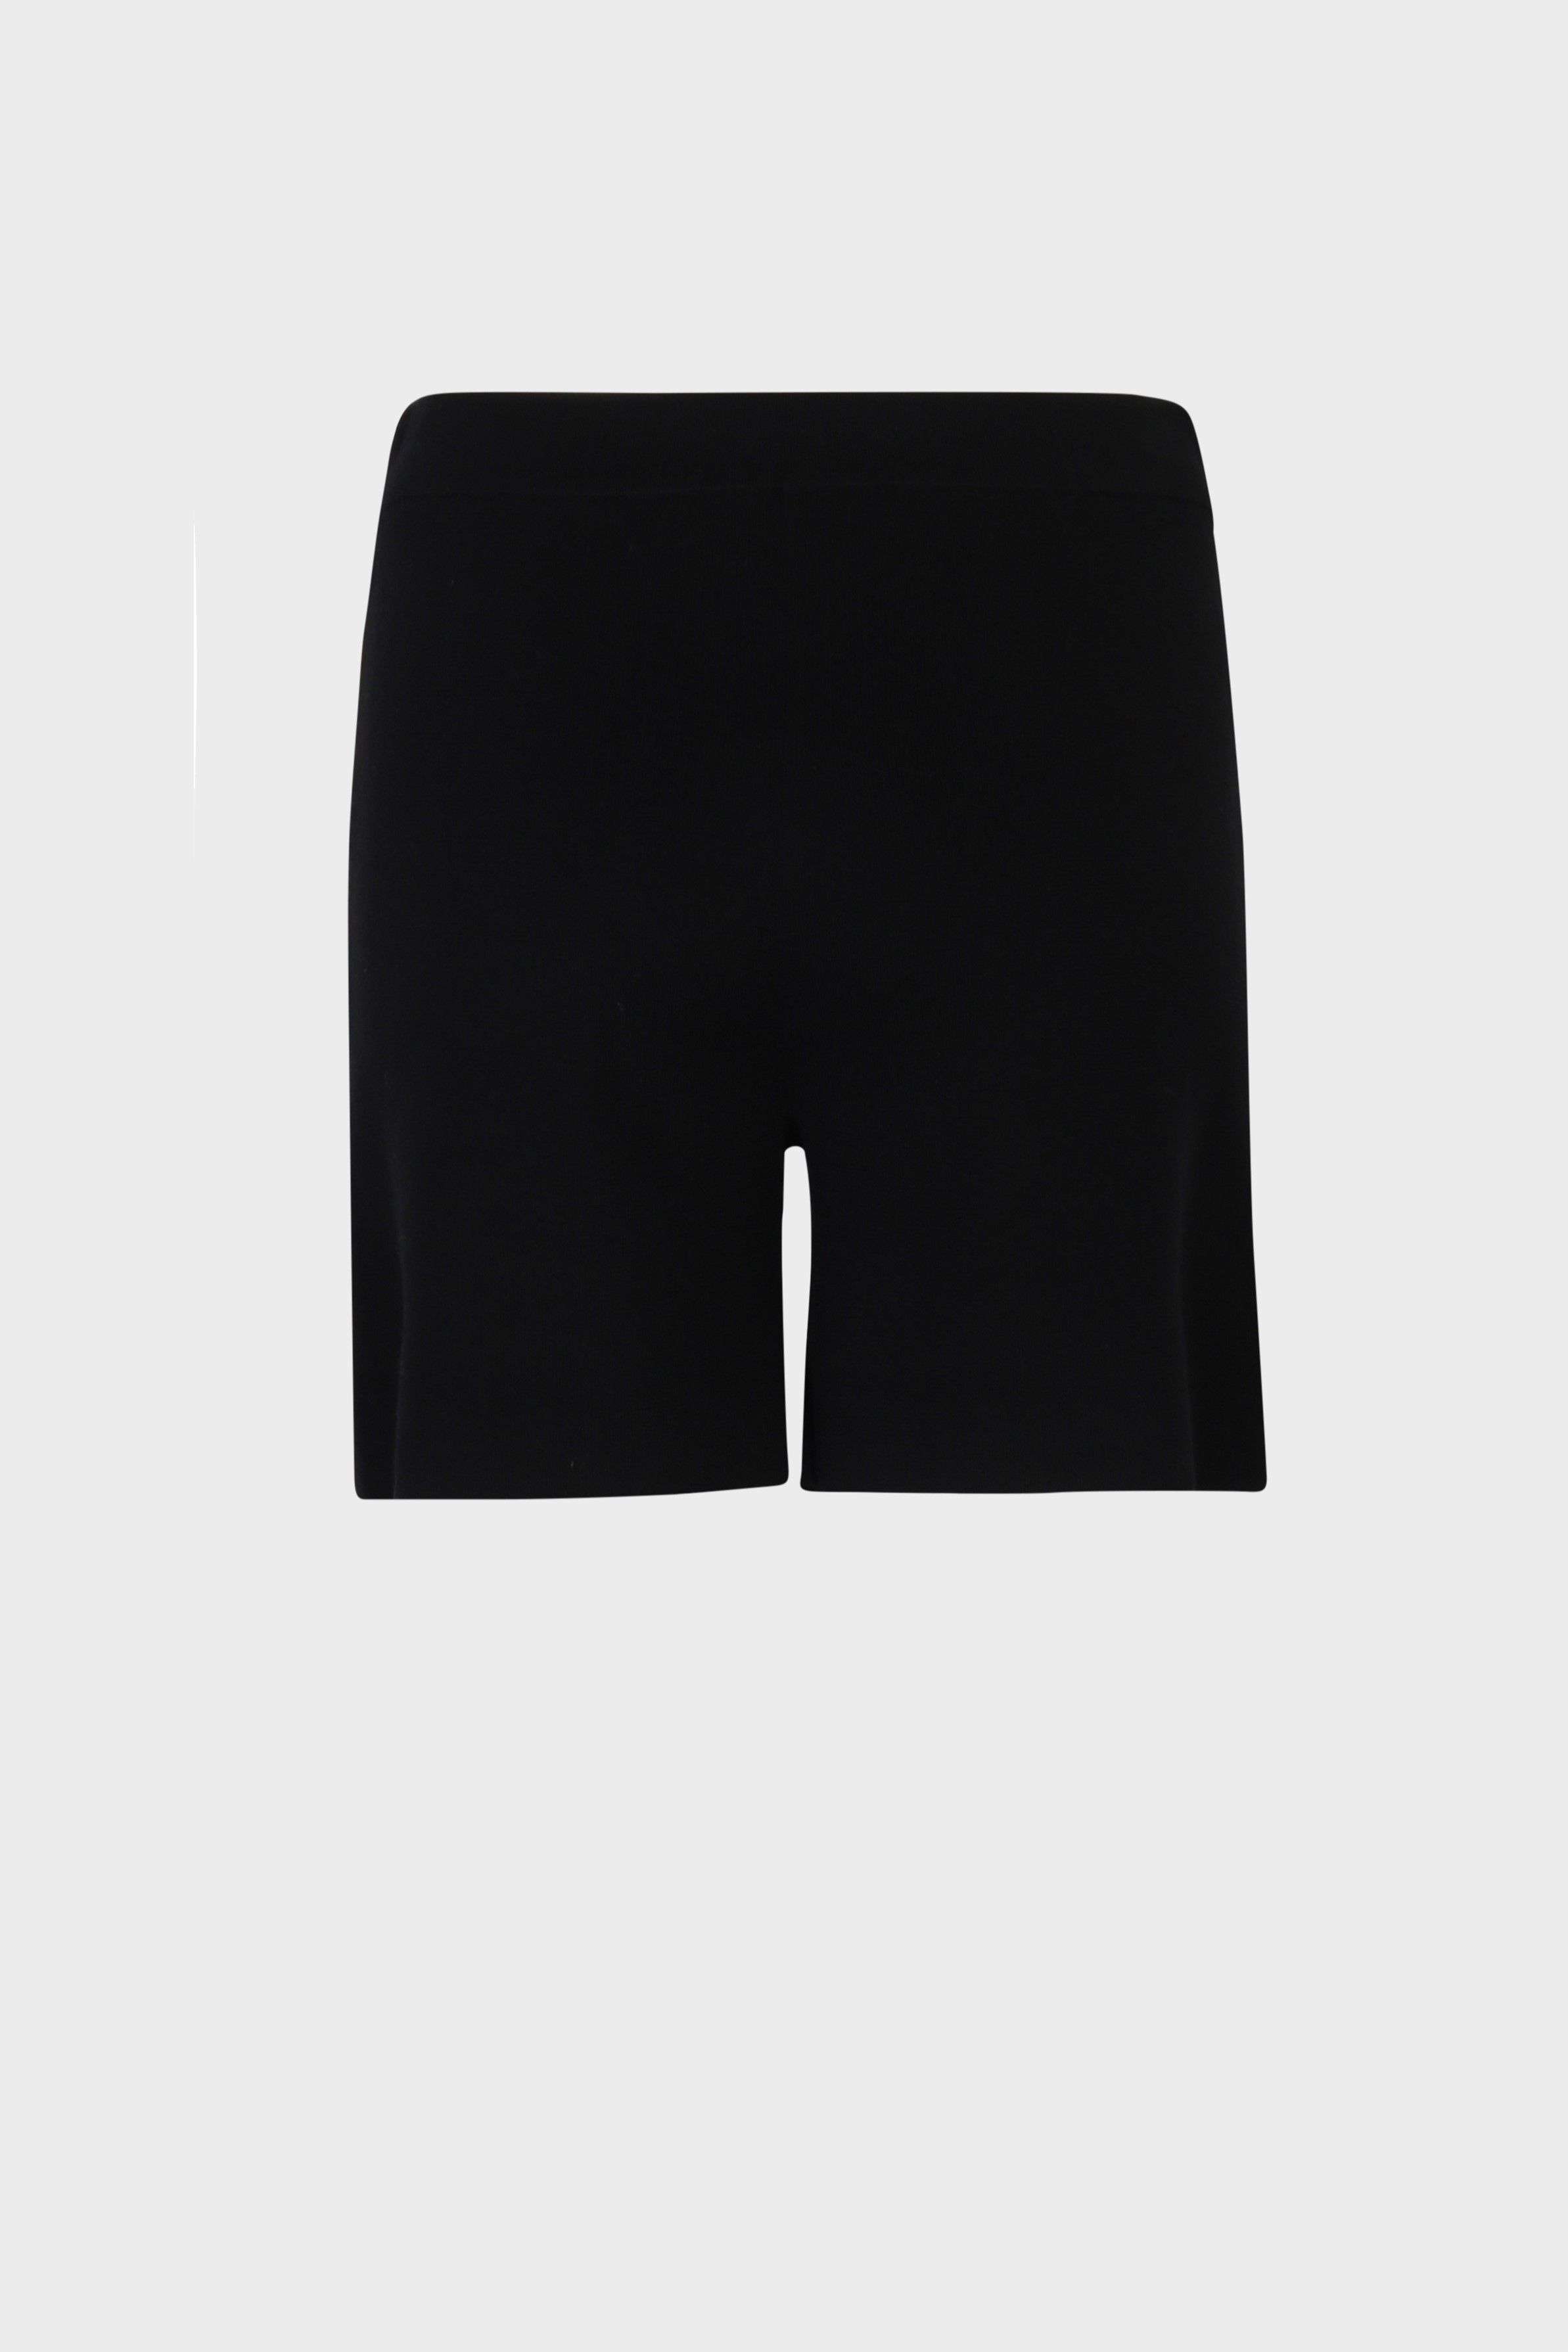 SMINFINITY Comfy Knit Shorts in Black  XS/S